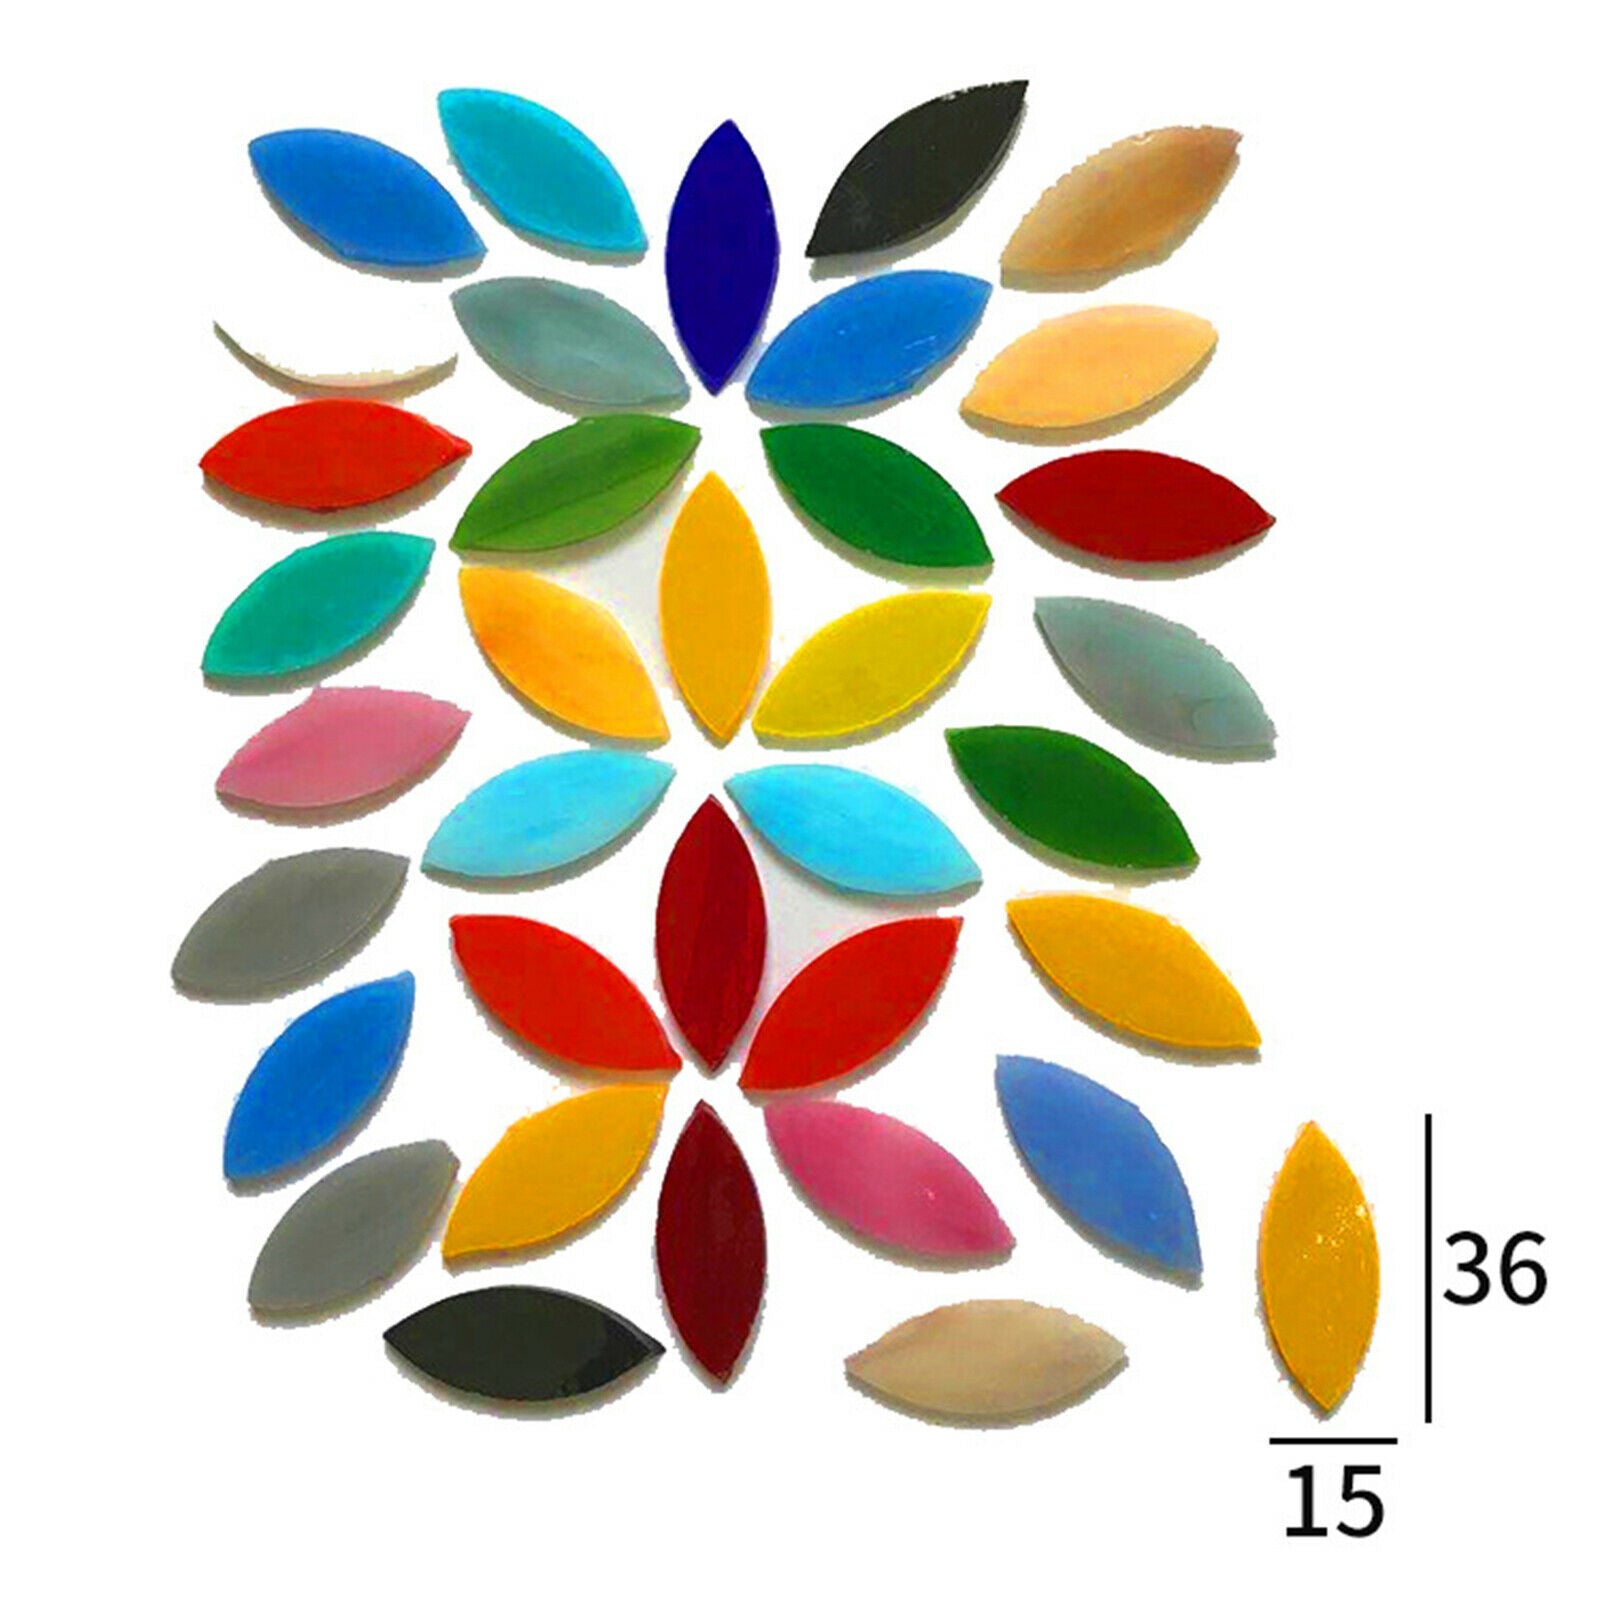 300x Mixed Colors Mosaic Tiles Stained Glass Garden Seat Table Decoration